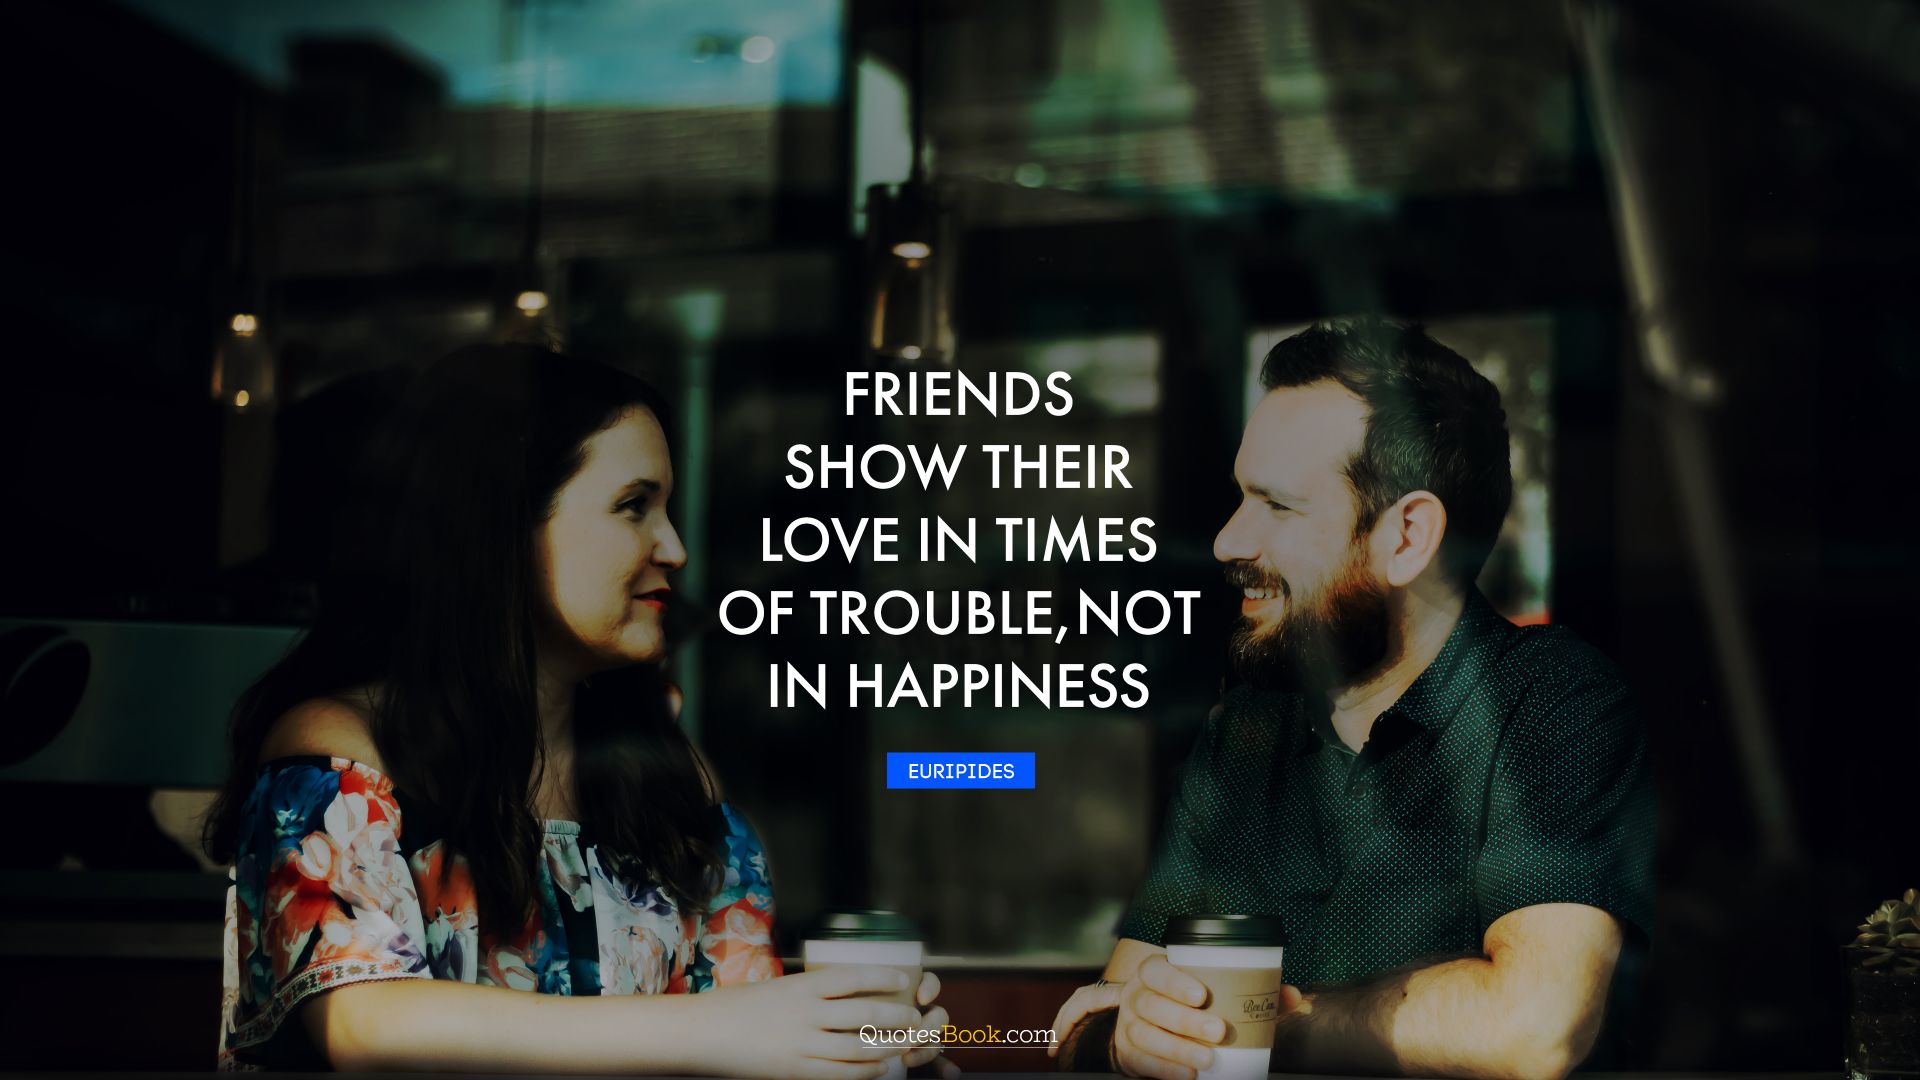 Friends show their love in times of trouble, not in happiness. - Quote by Euripides